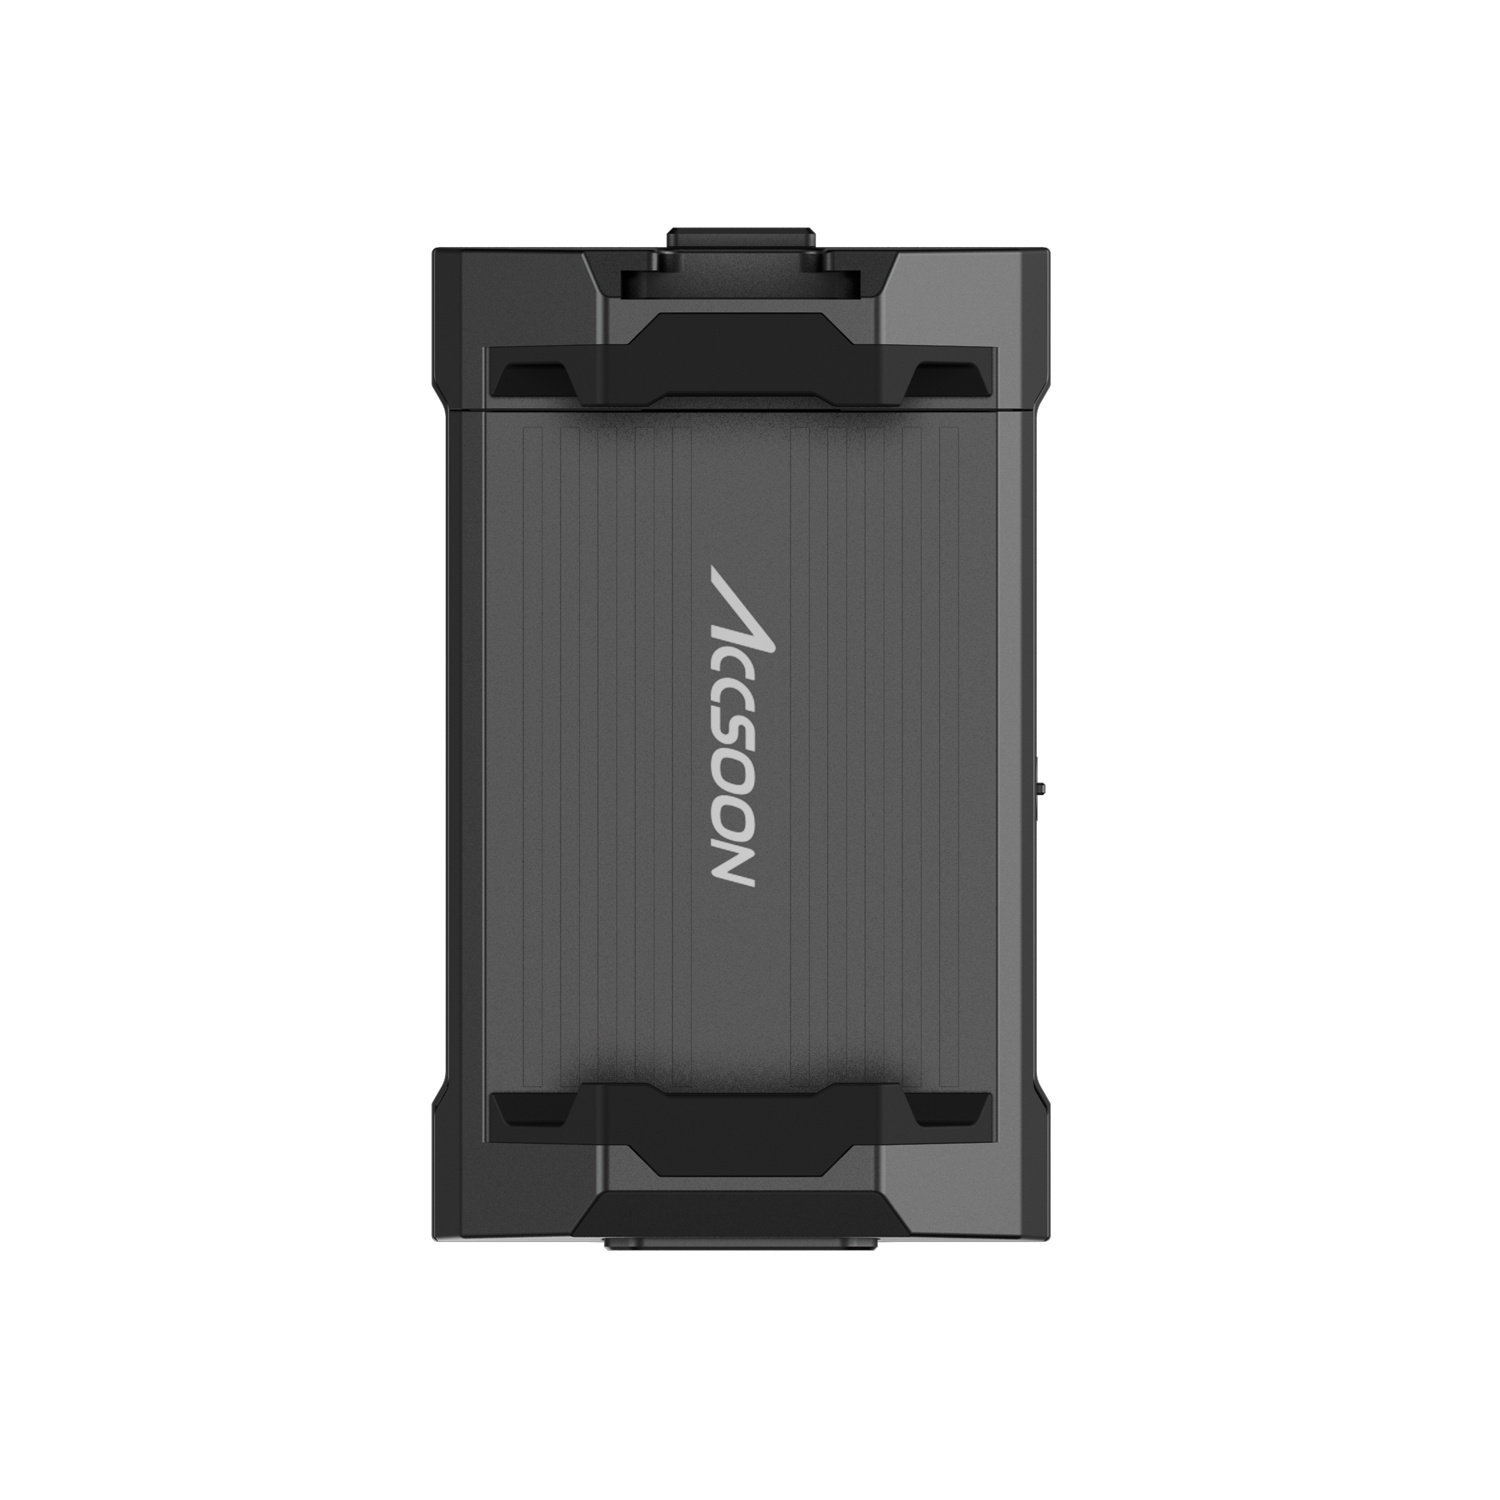 Accsoon M1 On-Camera Device for Smartphone Monitoring, Recording & Streaming (Black)